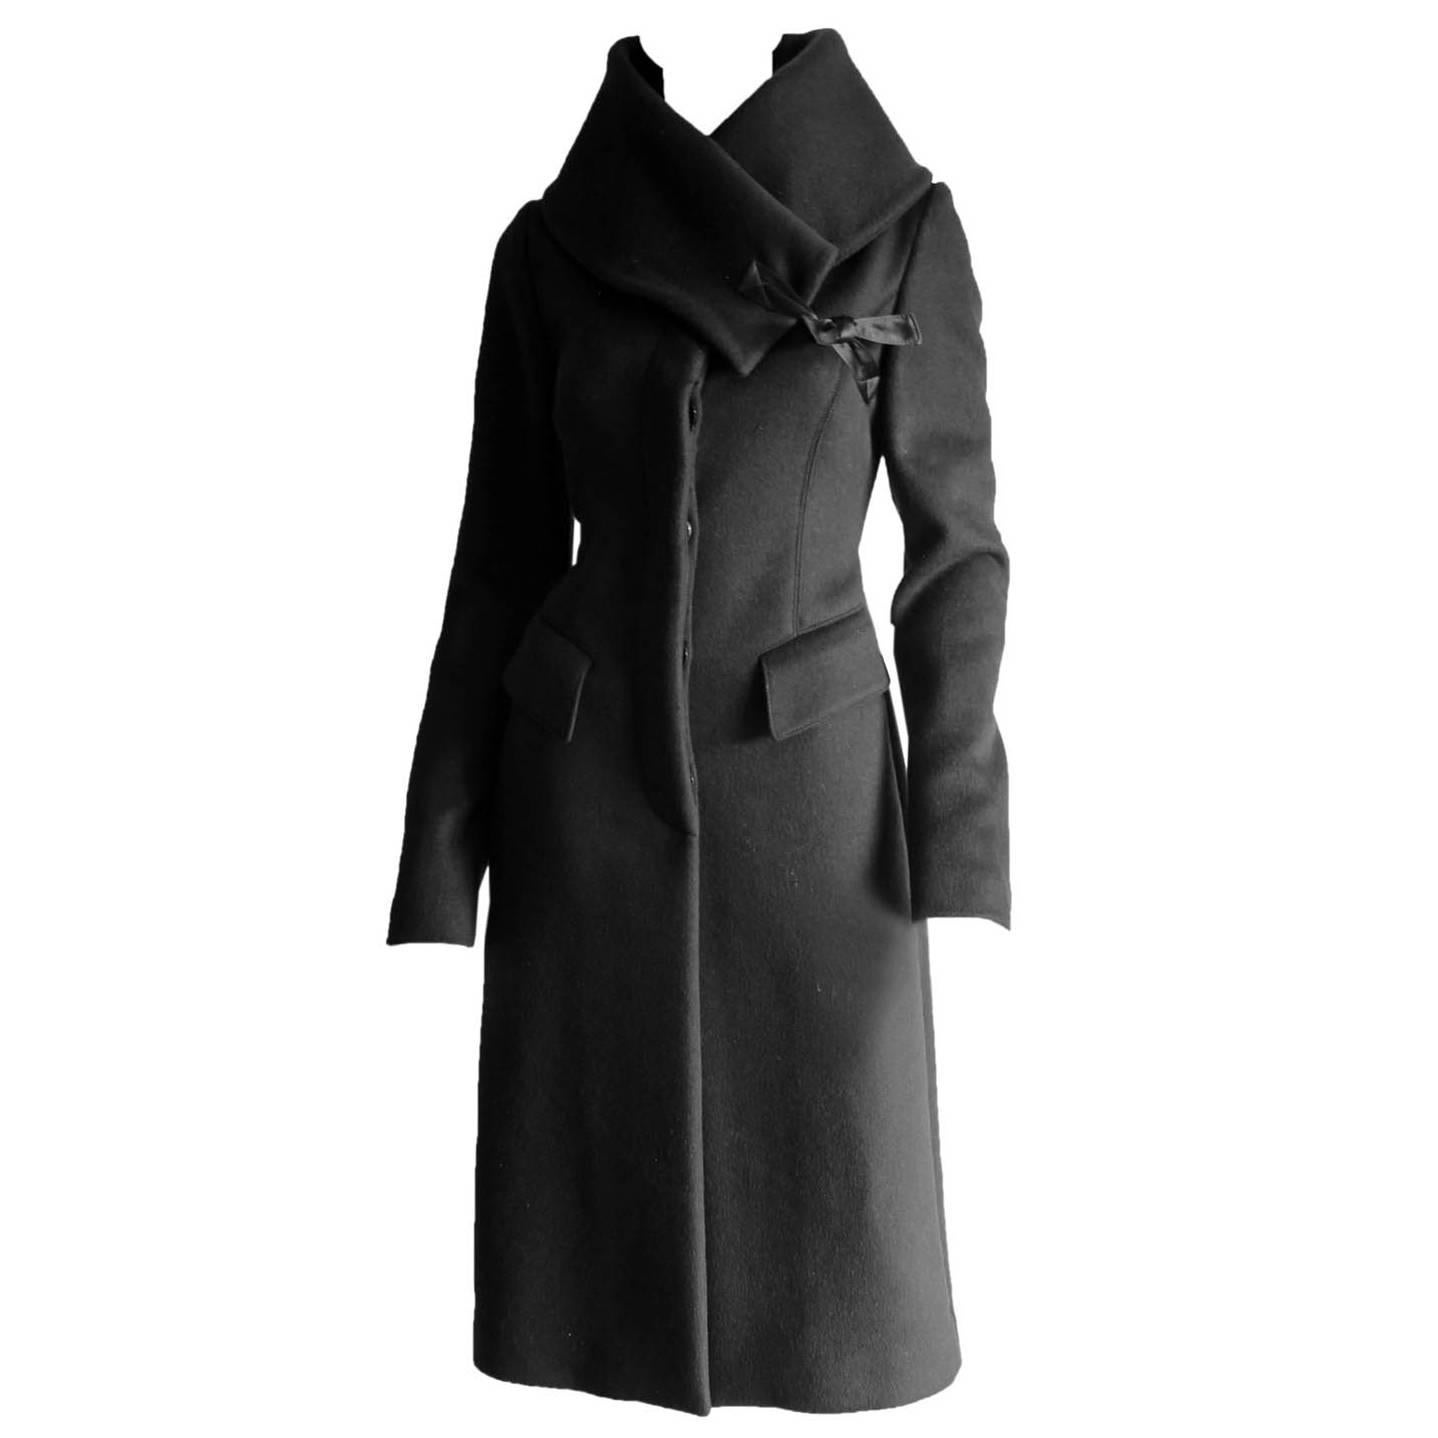 The Most Heavenly Tom Ford Gucci FW 2003 Black Cashmere Corseted Runway Coat!